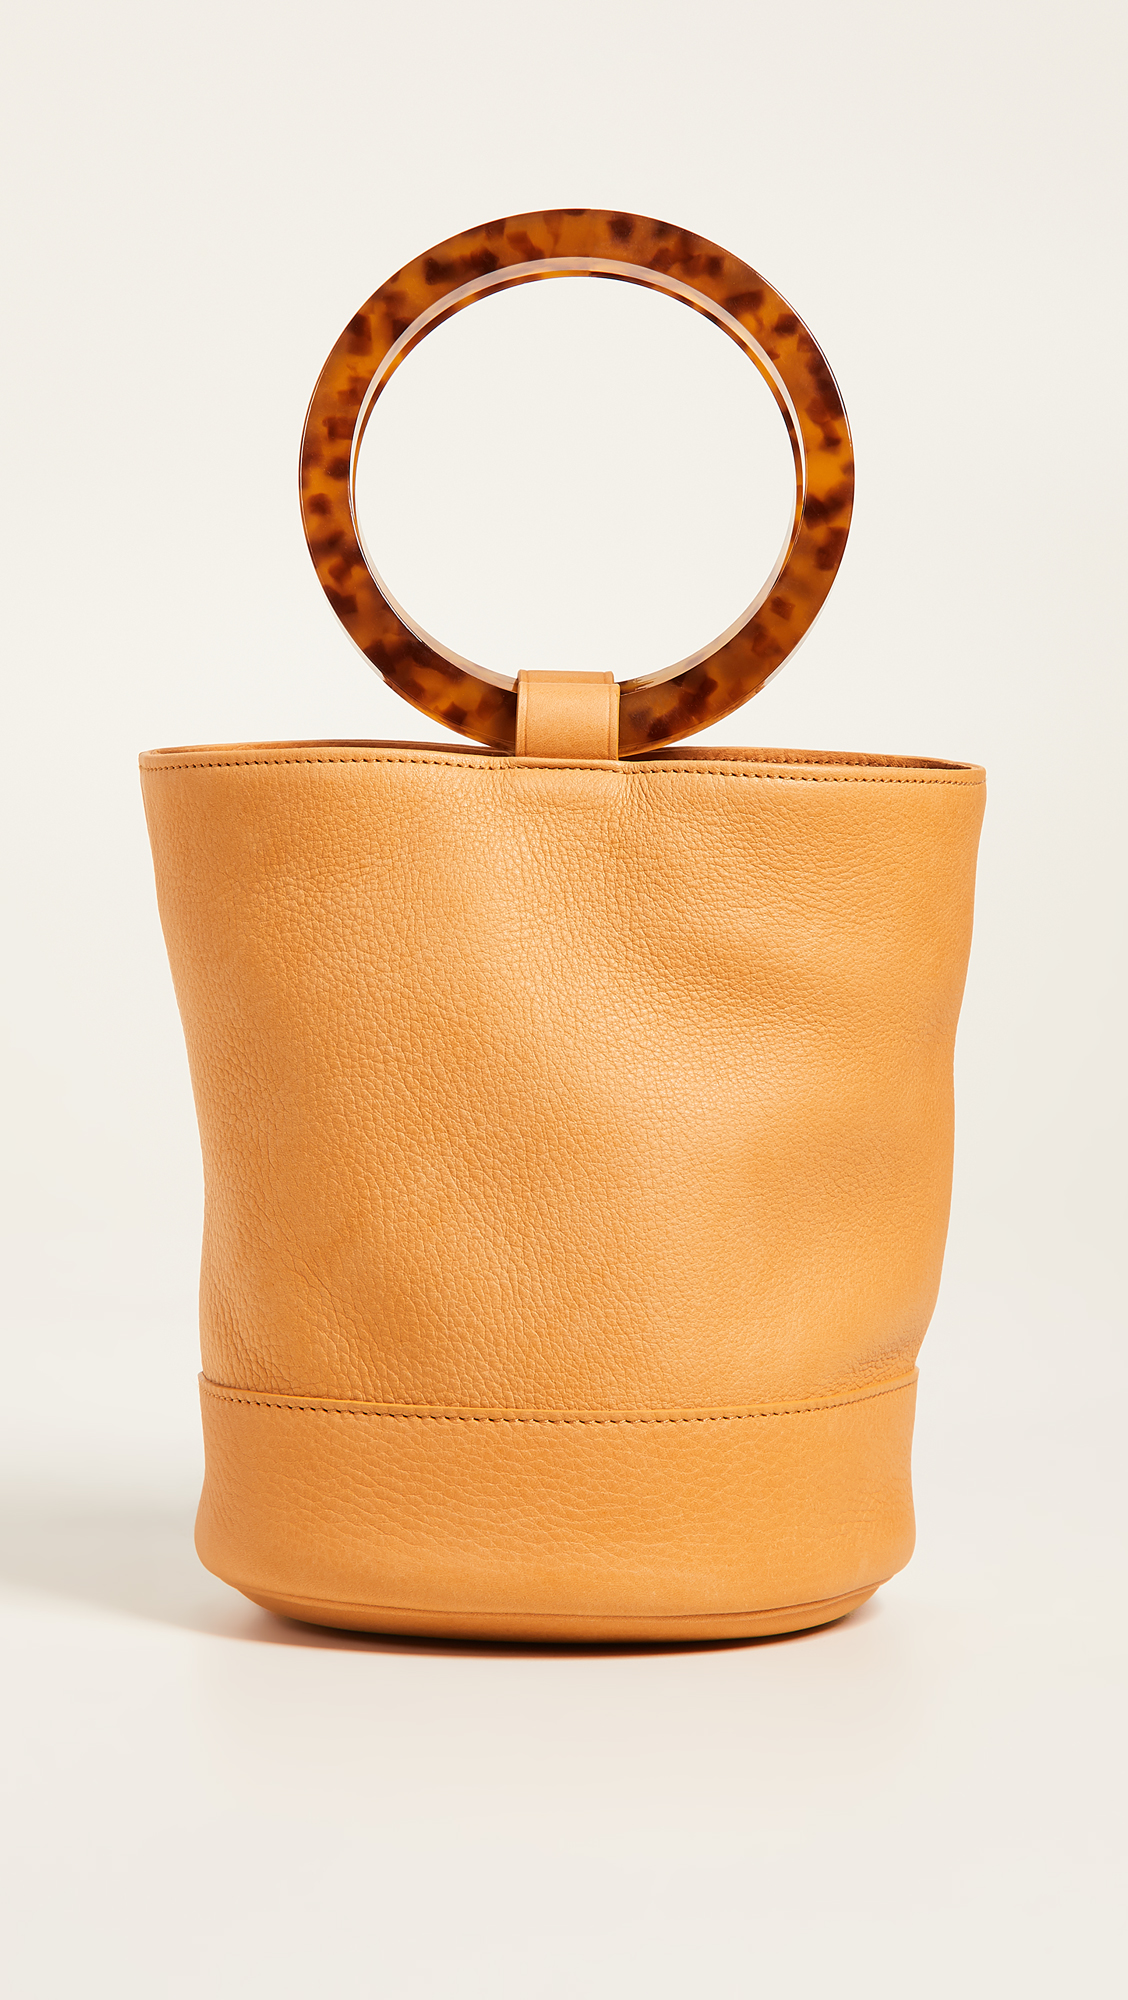 Bonsai Bag with Camel Leather and Round Tortoiseshell Handles